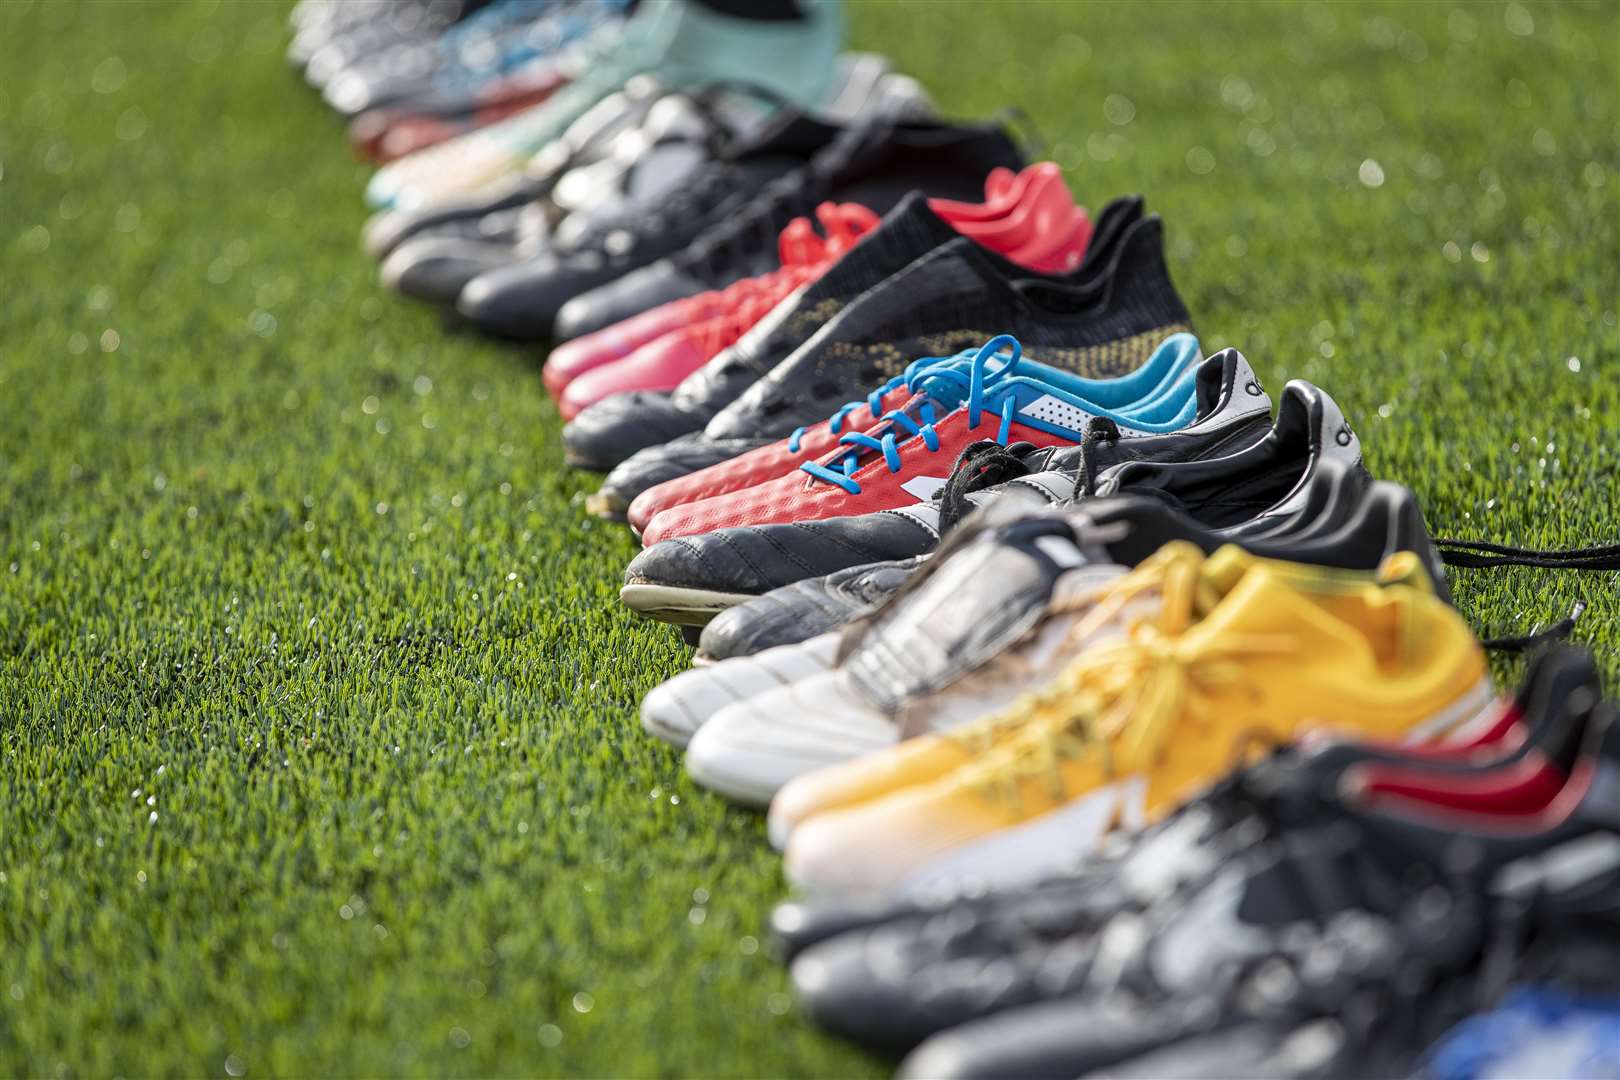 Claim stations will offer the donated boots including those once belonging to players in top clubs and academies